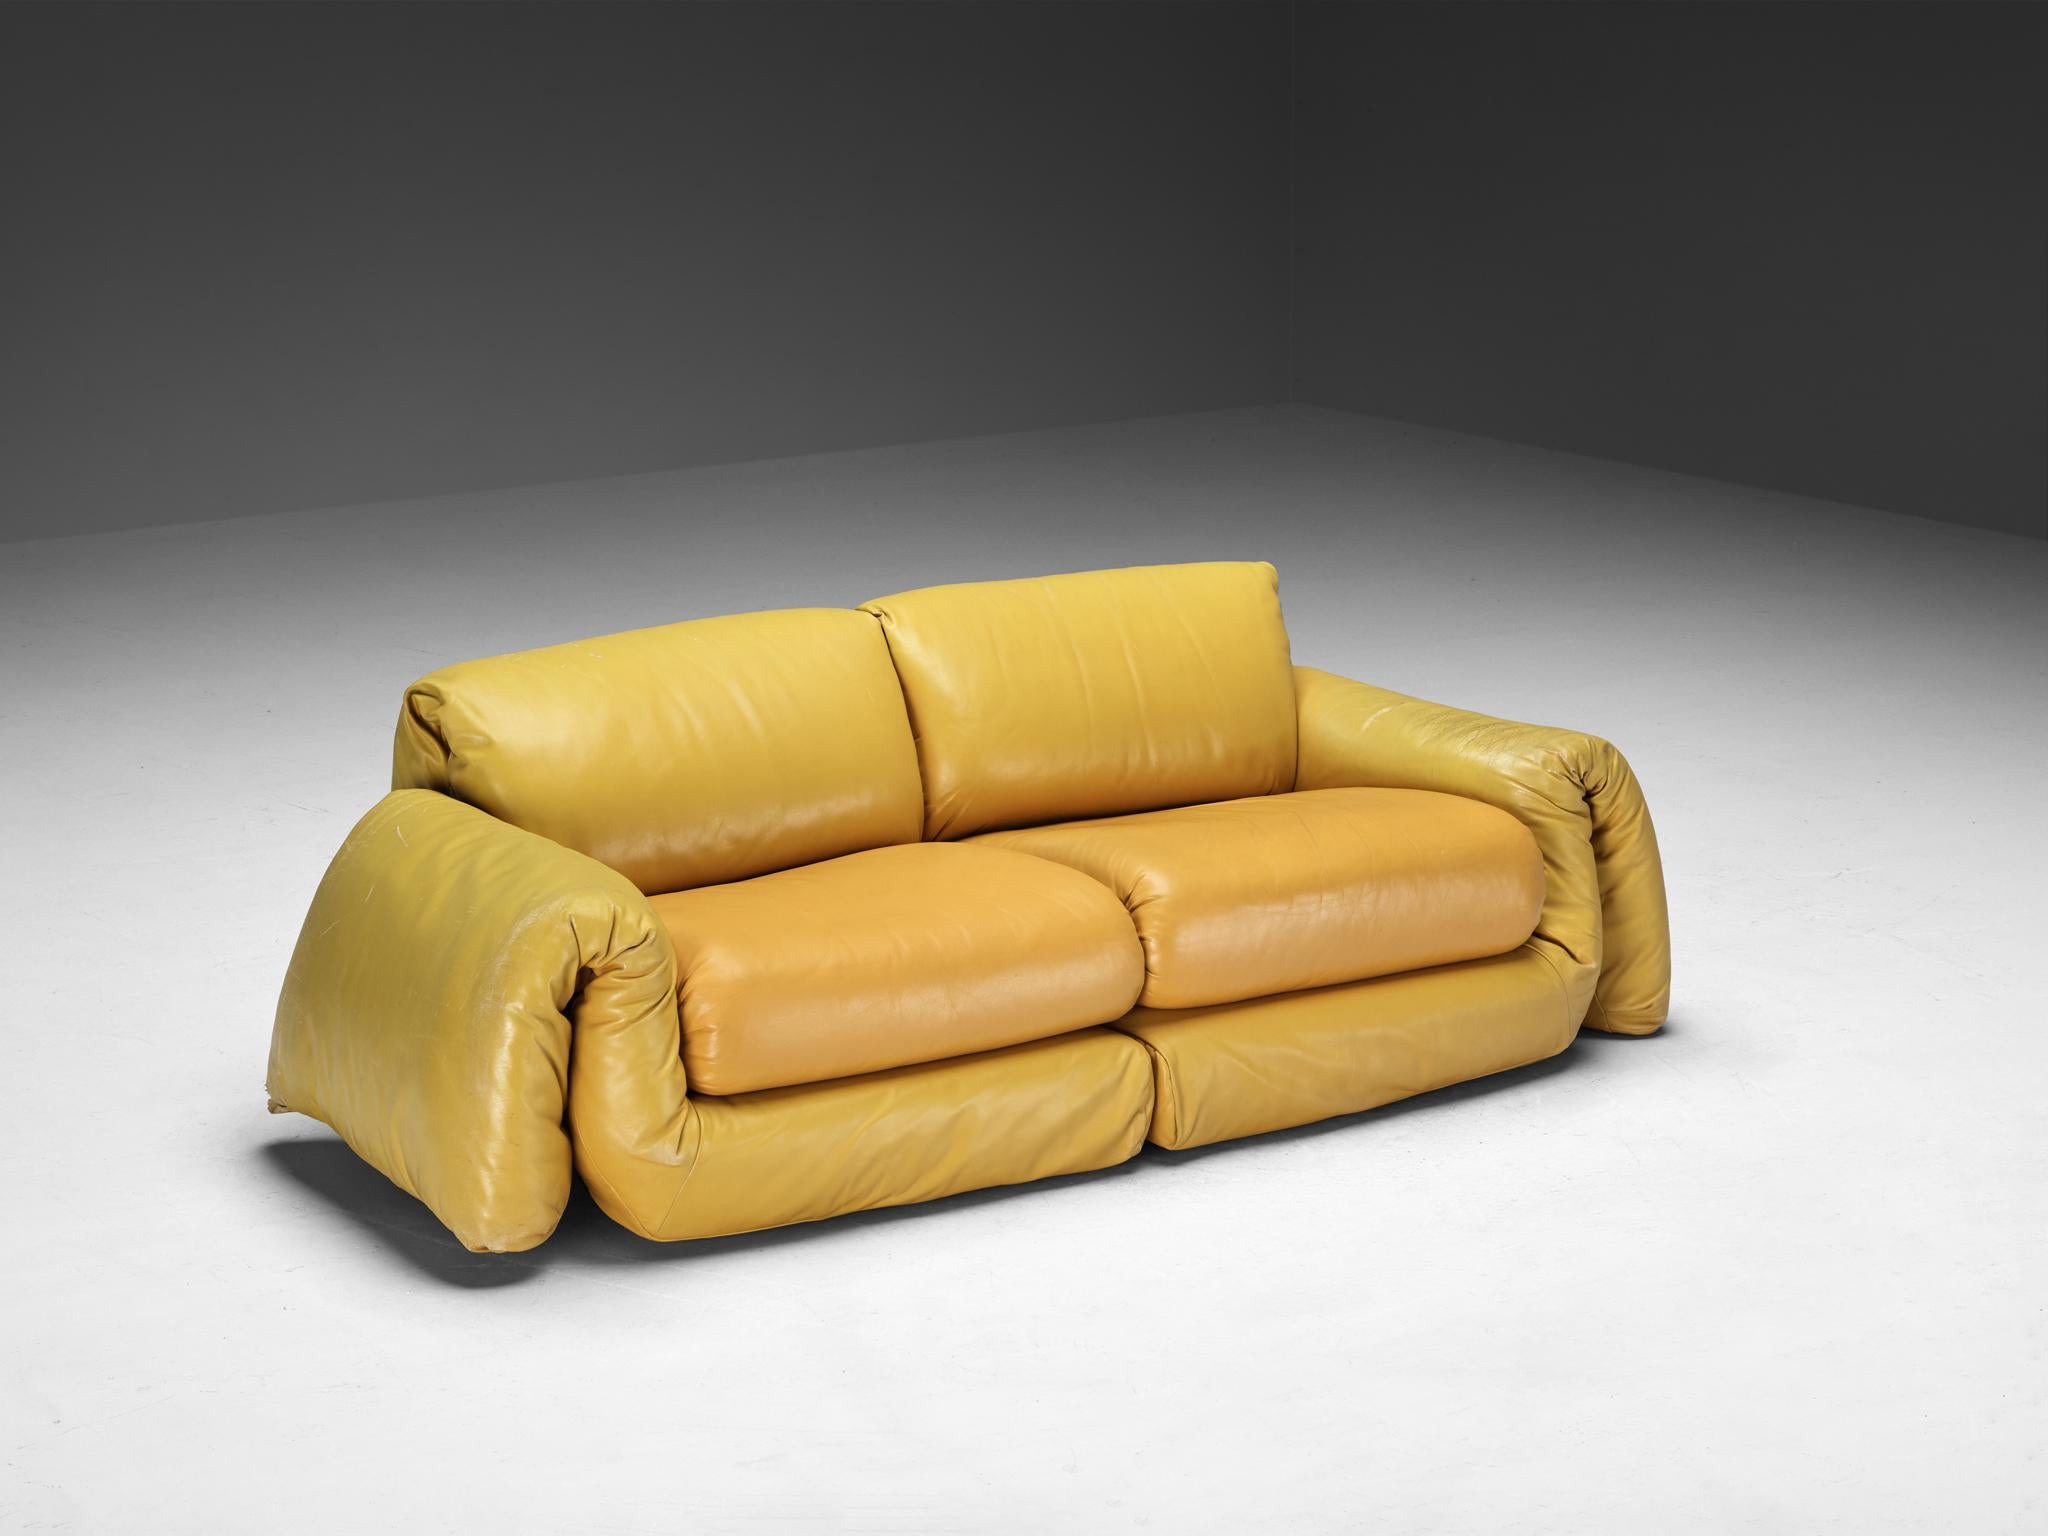 Sofa, leather, Europe, 1970s

Eye catching sofa made in the vibrant 1970s in Europe. This piece serves as a embodiment of both stylish design and comfort, with its plush and very soft leather cushions. This piece boasts a vibrant yellow leather